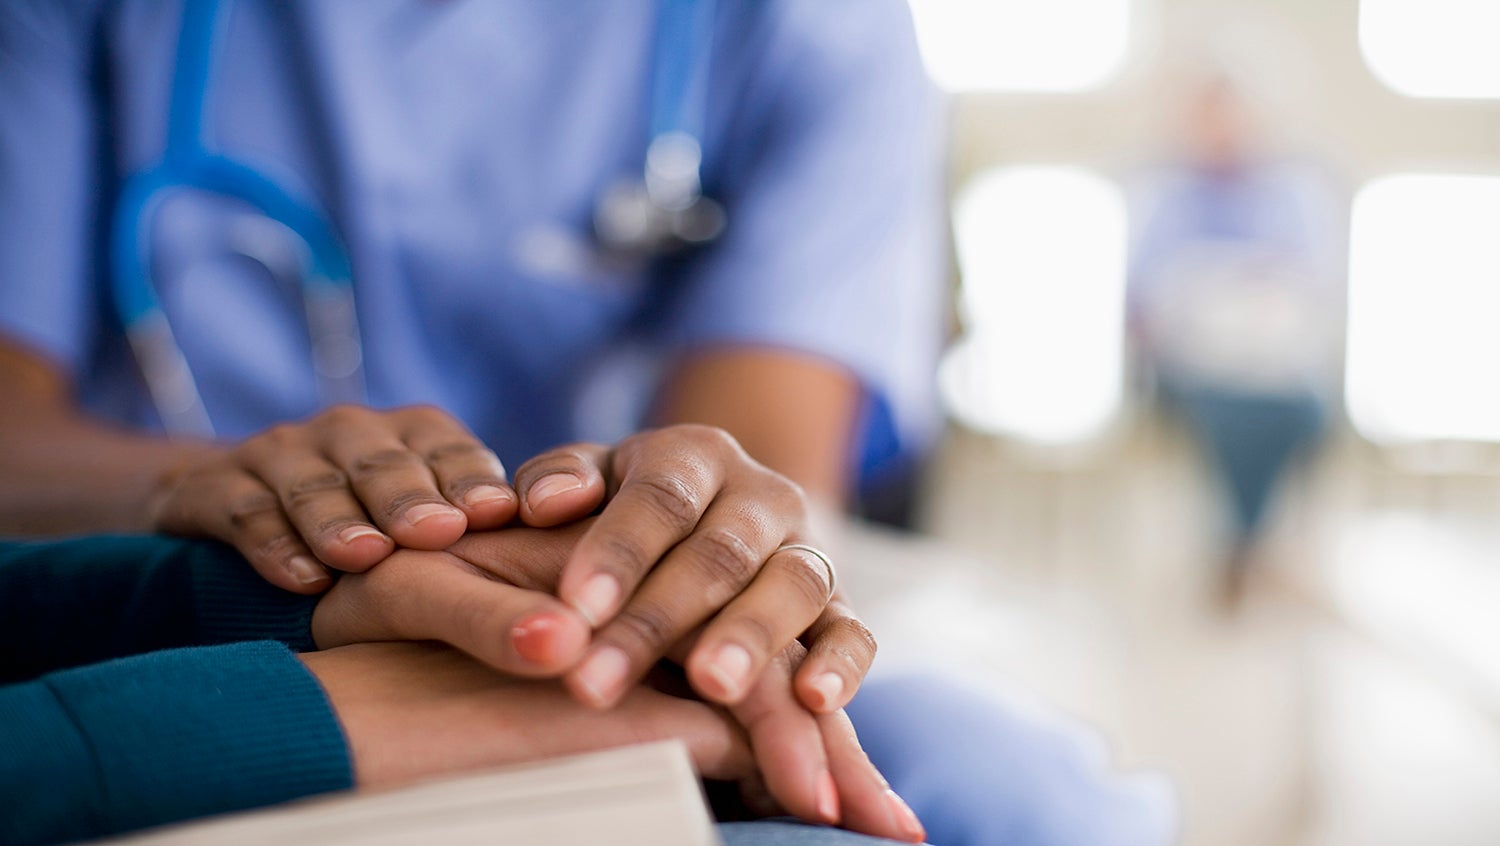 Doctor showing support for patient by touching hand